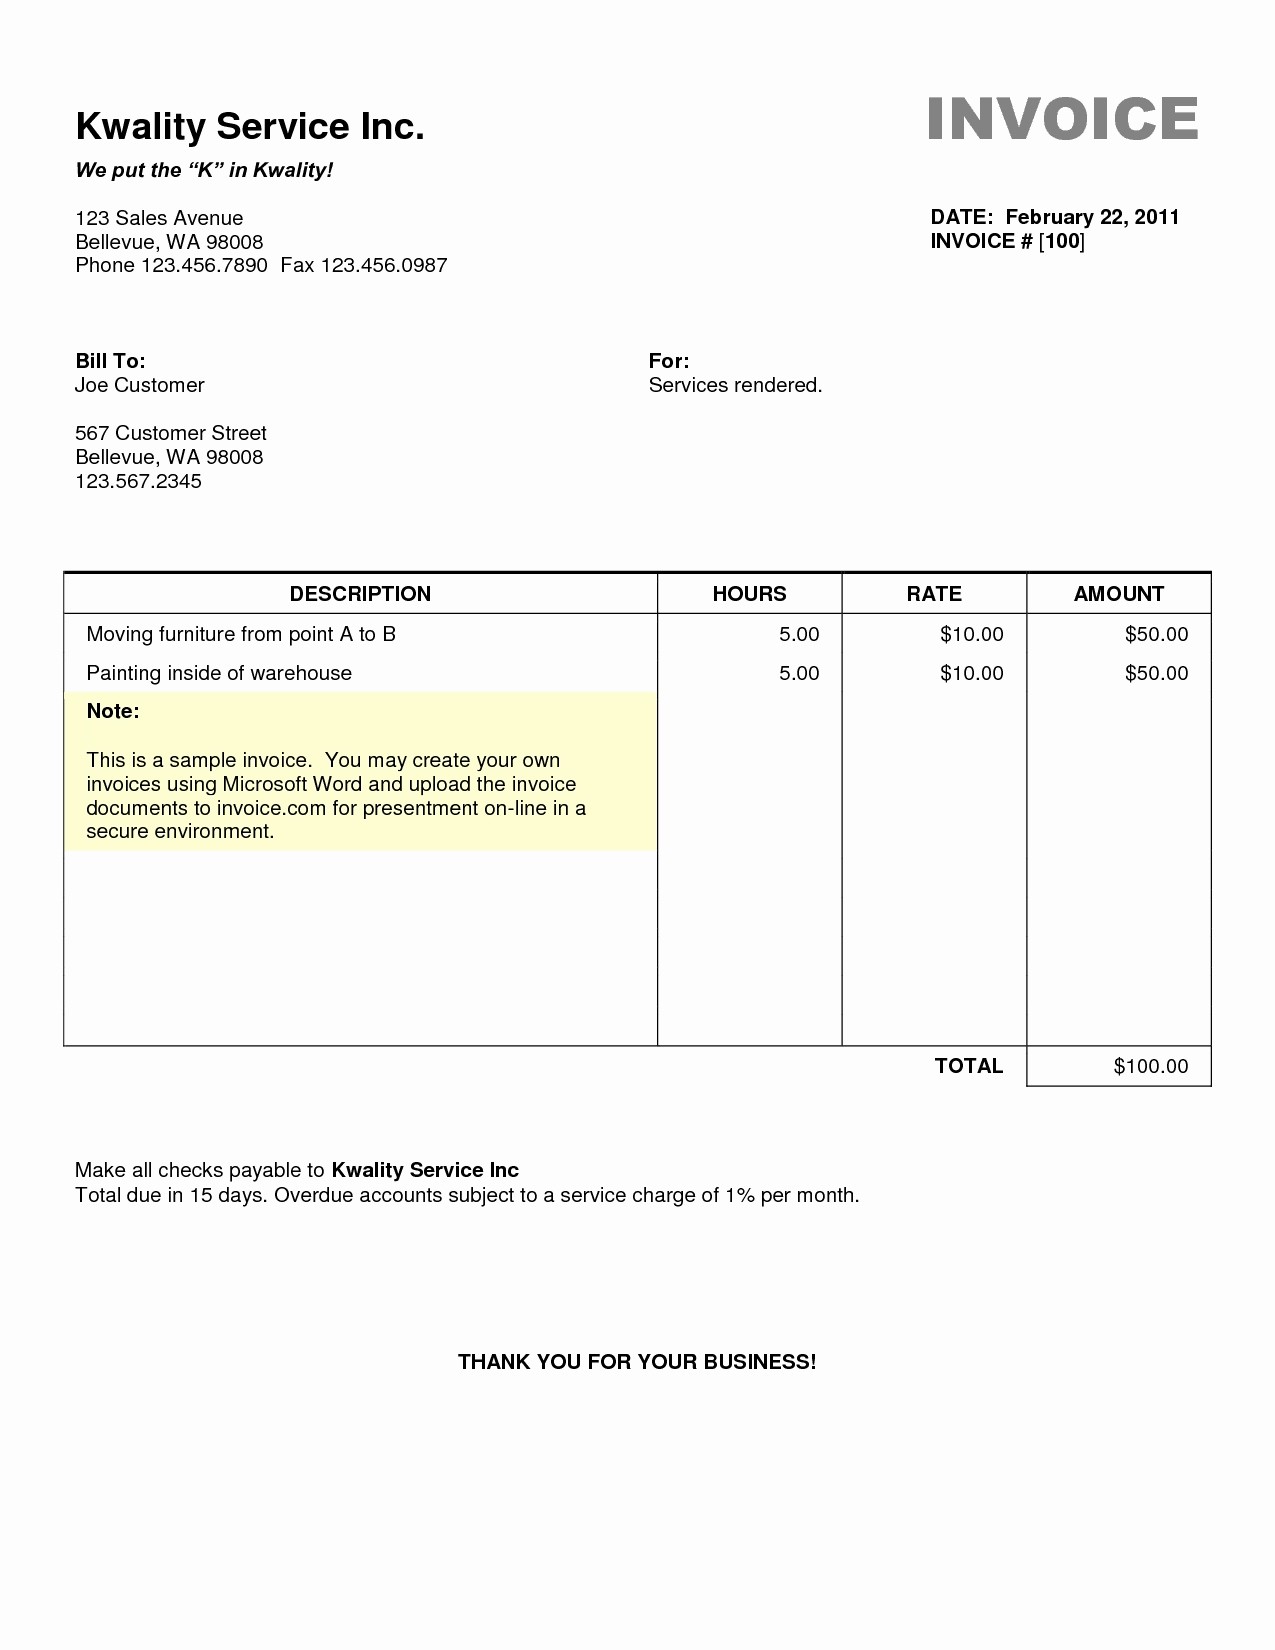 Microsoft Word Invoice Templates Free Best Of Microsoft Word 2007 Invoice Template Invoice Template Ideas